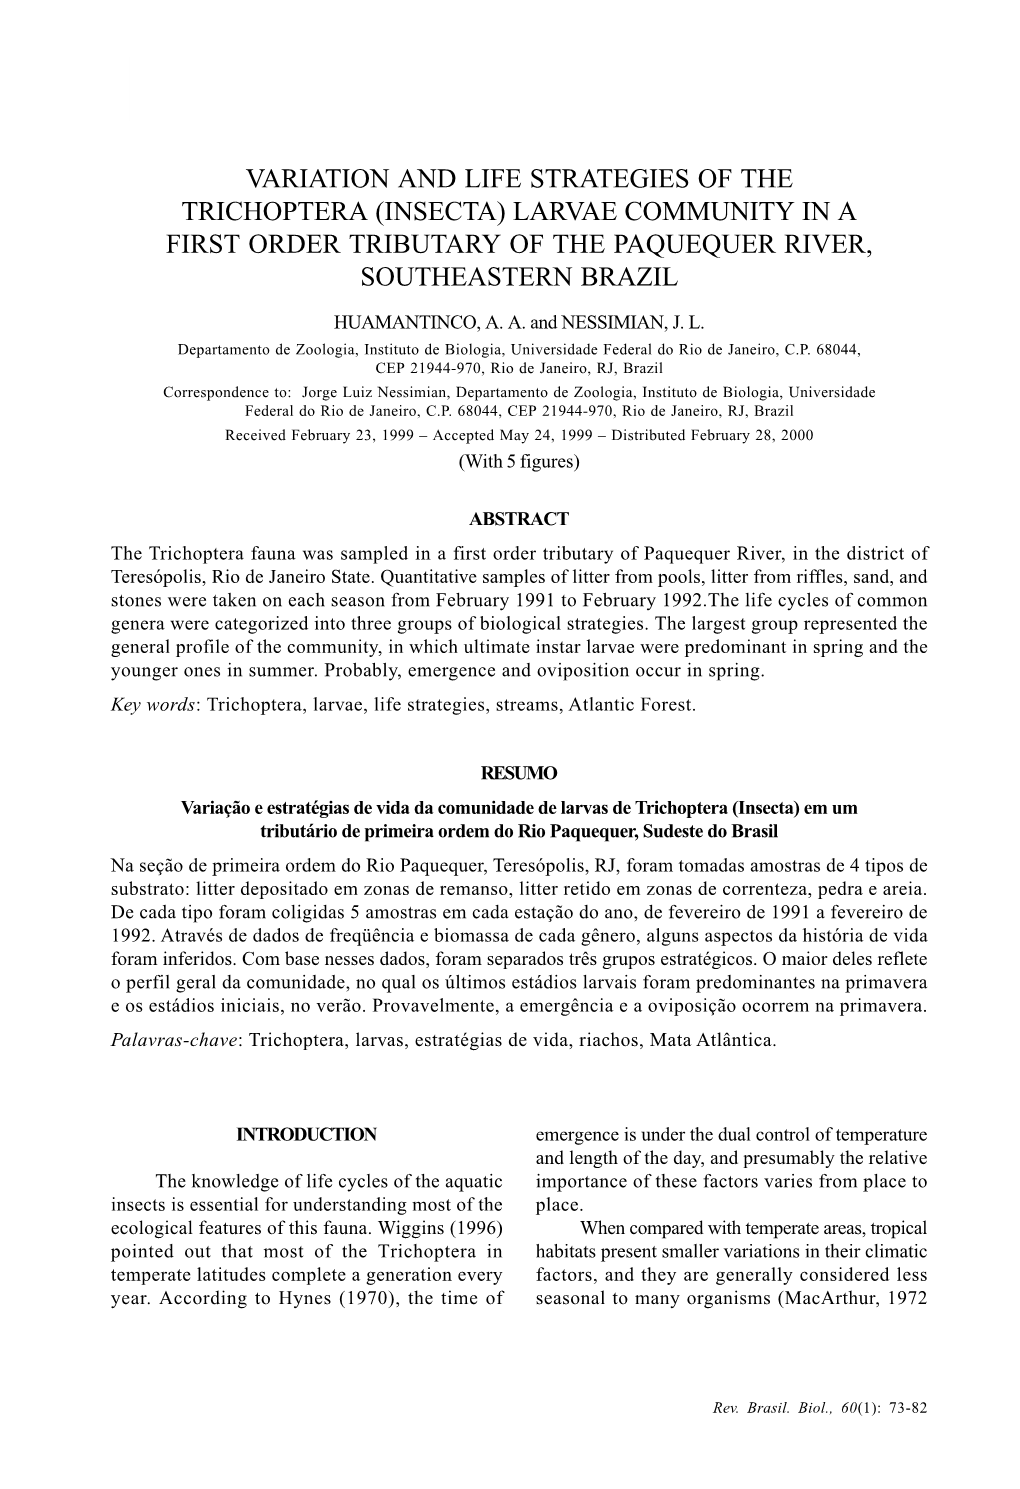 Variation and Life Strategies of the Trichoptera (Insecta) Larvae Community in a First Order Tributary of the Paquequer River, Southeastern Brazil